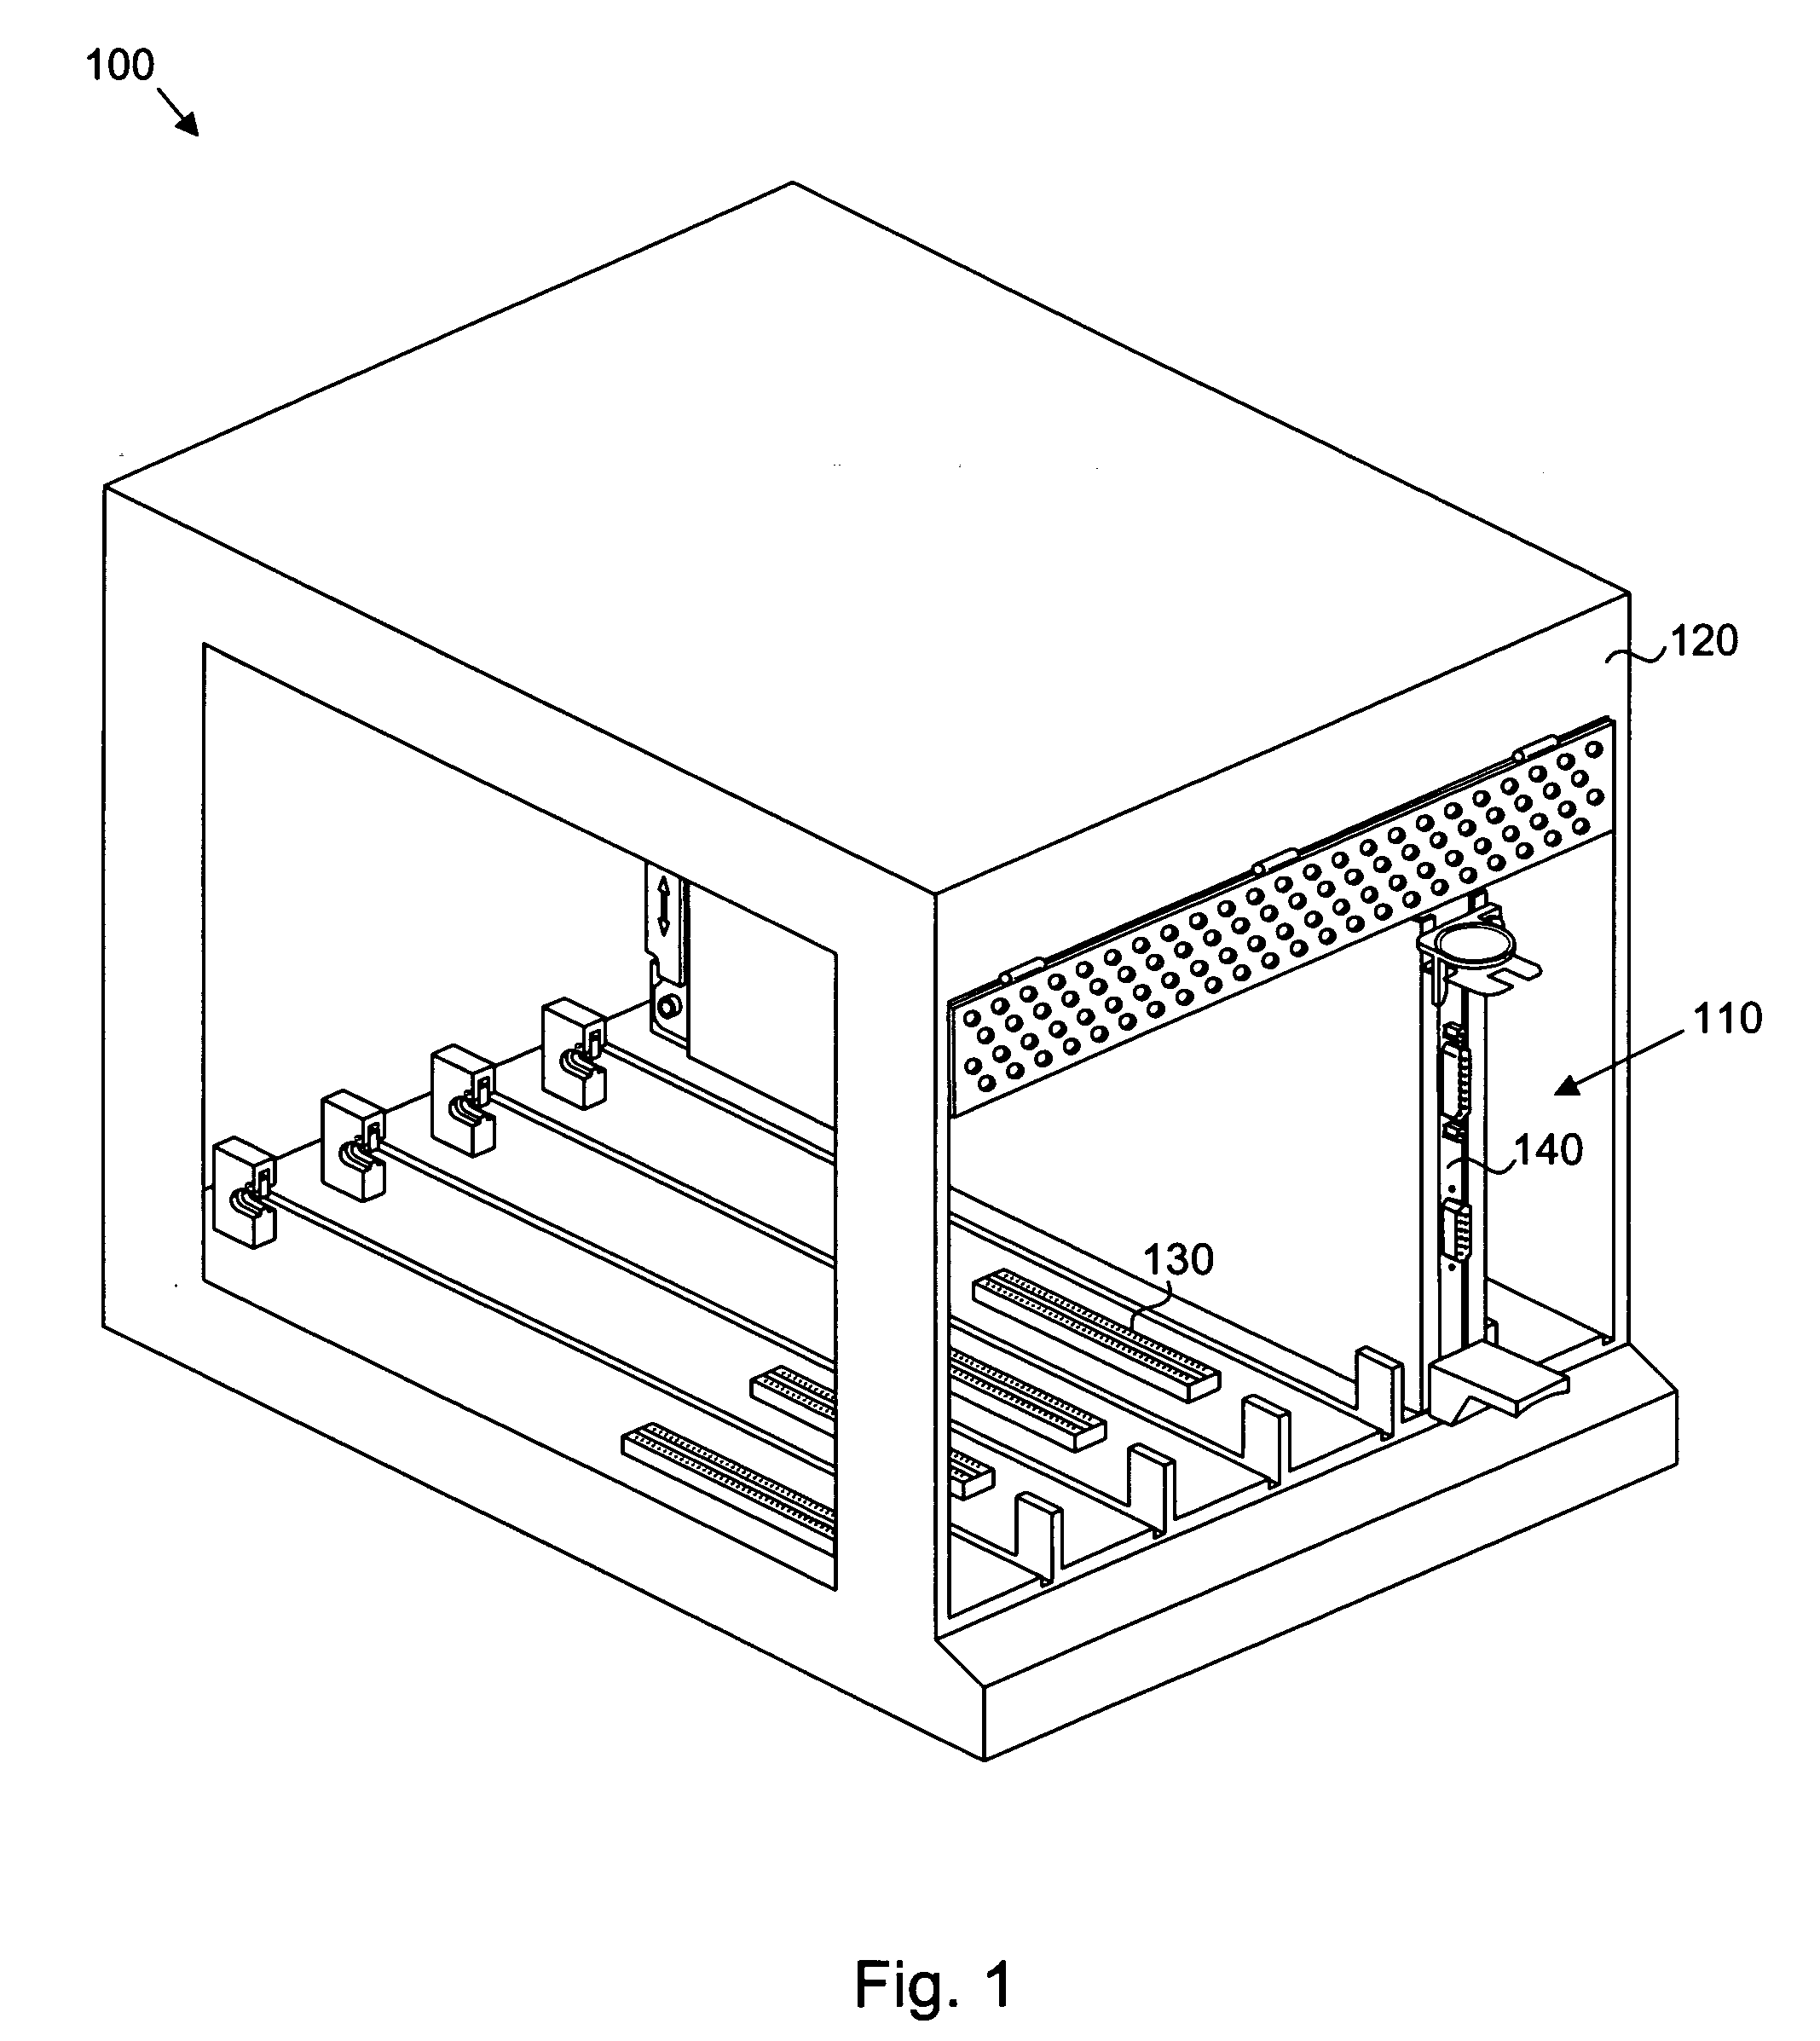 Apparatus, system, and method for pivotal installation and removal of an expansion card